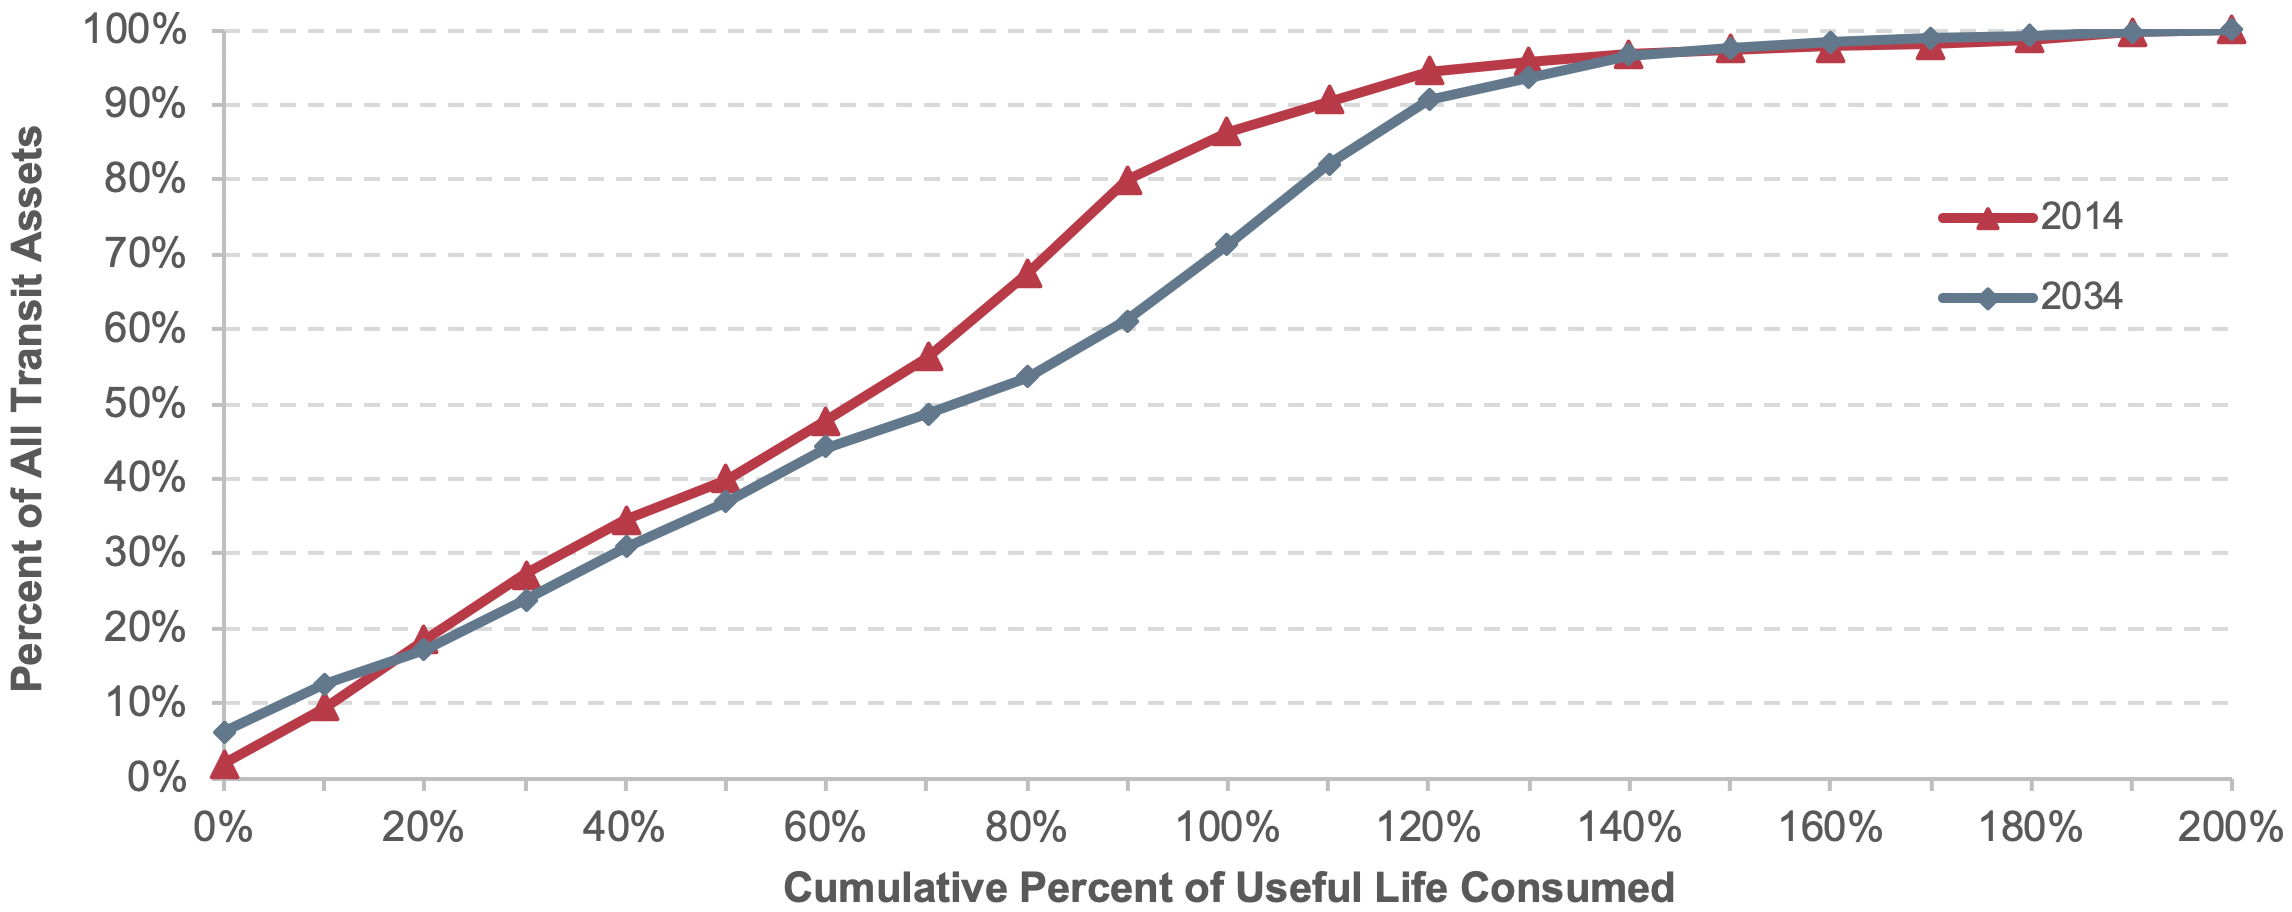 A line graph plots values for share of all transit assets in percent over cumulative percent of useful life consumed for the year 2014 and the year 2034.  The plot for the year 2014 has an initial value of 2 percent of all transit assets for 0 percent of useful life consumed, increases to a value of 86 percent of all transit assets for 100 percent of useful life consumed, and trails off to 100 percent of all assets for 200 percent of useful life consumed.  The plot for the year 2034 has an initial value of 6 percent of all assets at 0 percent of useful life consumed, increases to 91 percent of all assets at 110 percent of useful life consumed, and trails off to reach a value of 100 percent of all assets at 200 percent of useful life consumed.  Source:  Transit Economic Requirements Model.